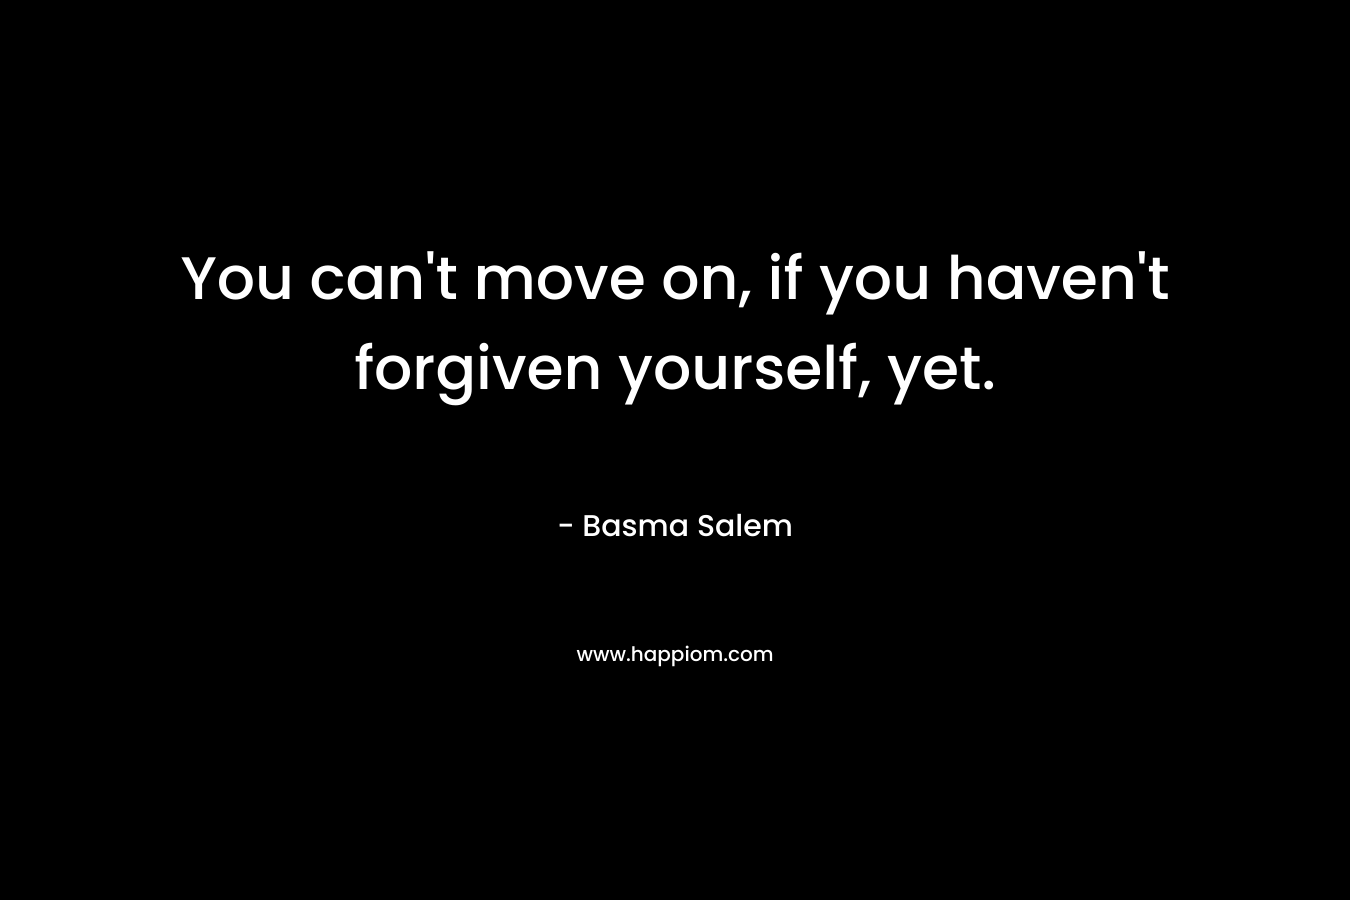 You can’t move on, if you haven’t forgiven yourself, yet. – Basma Salem